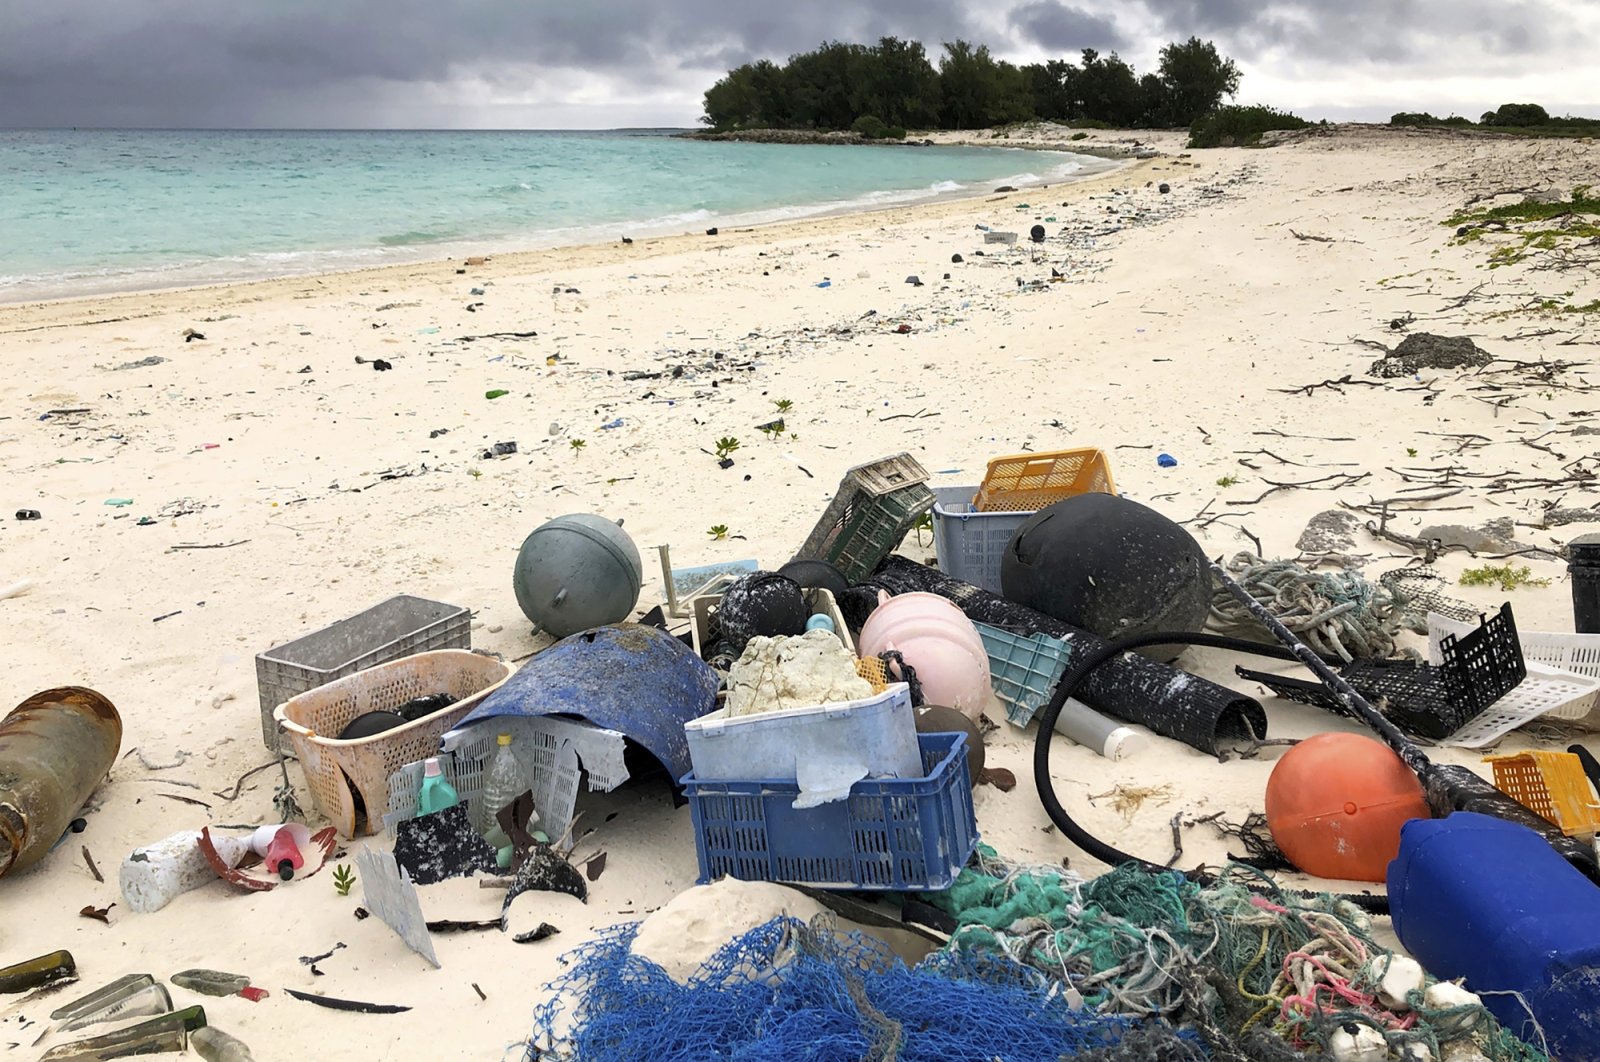 How many kilos of rubbish are dumped into the ocean every year